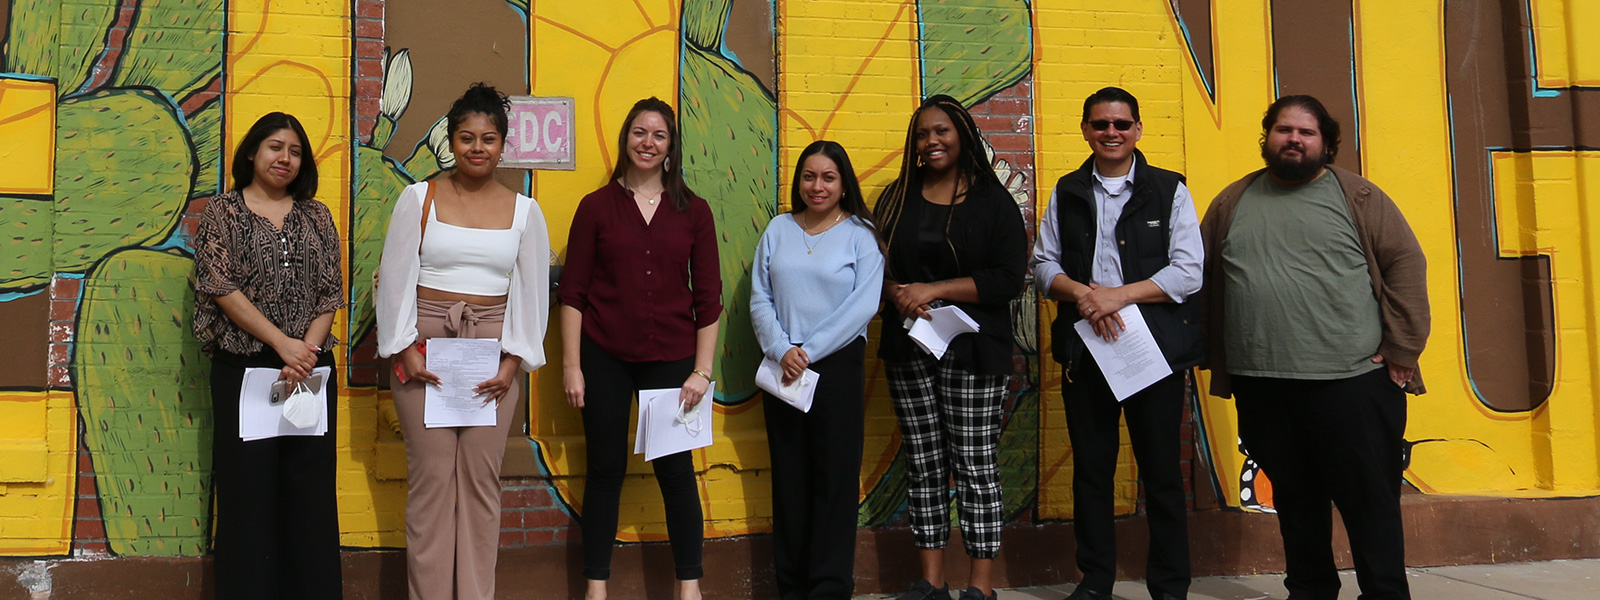 Students in front of mural 